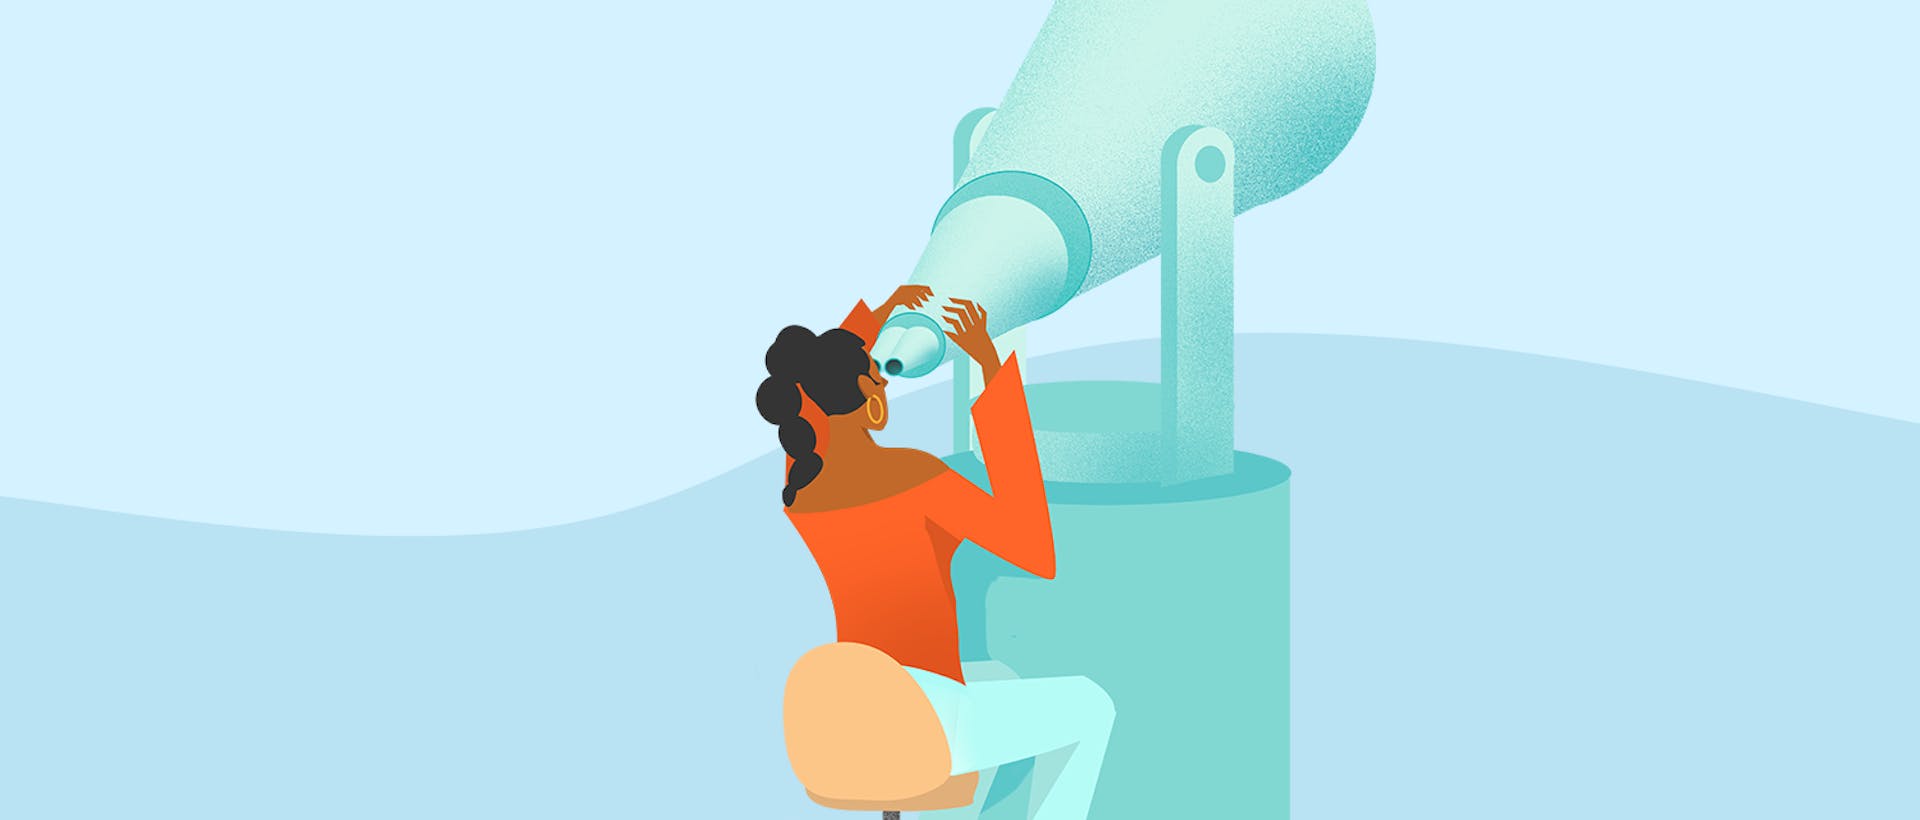 Looking for an alternative social media management solution? This image of a woman staring into a giant telescope represents how monumental that search can feel. In this blog, we explore alternative social media solutions to Hootsuite.